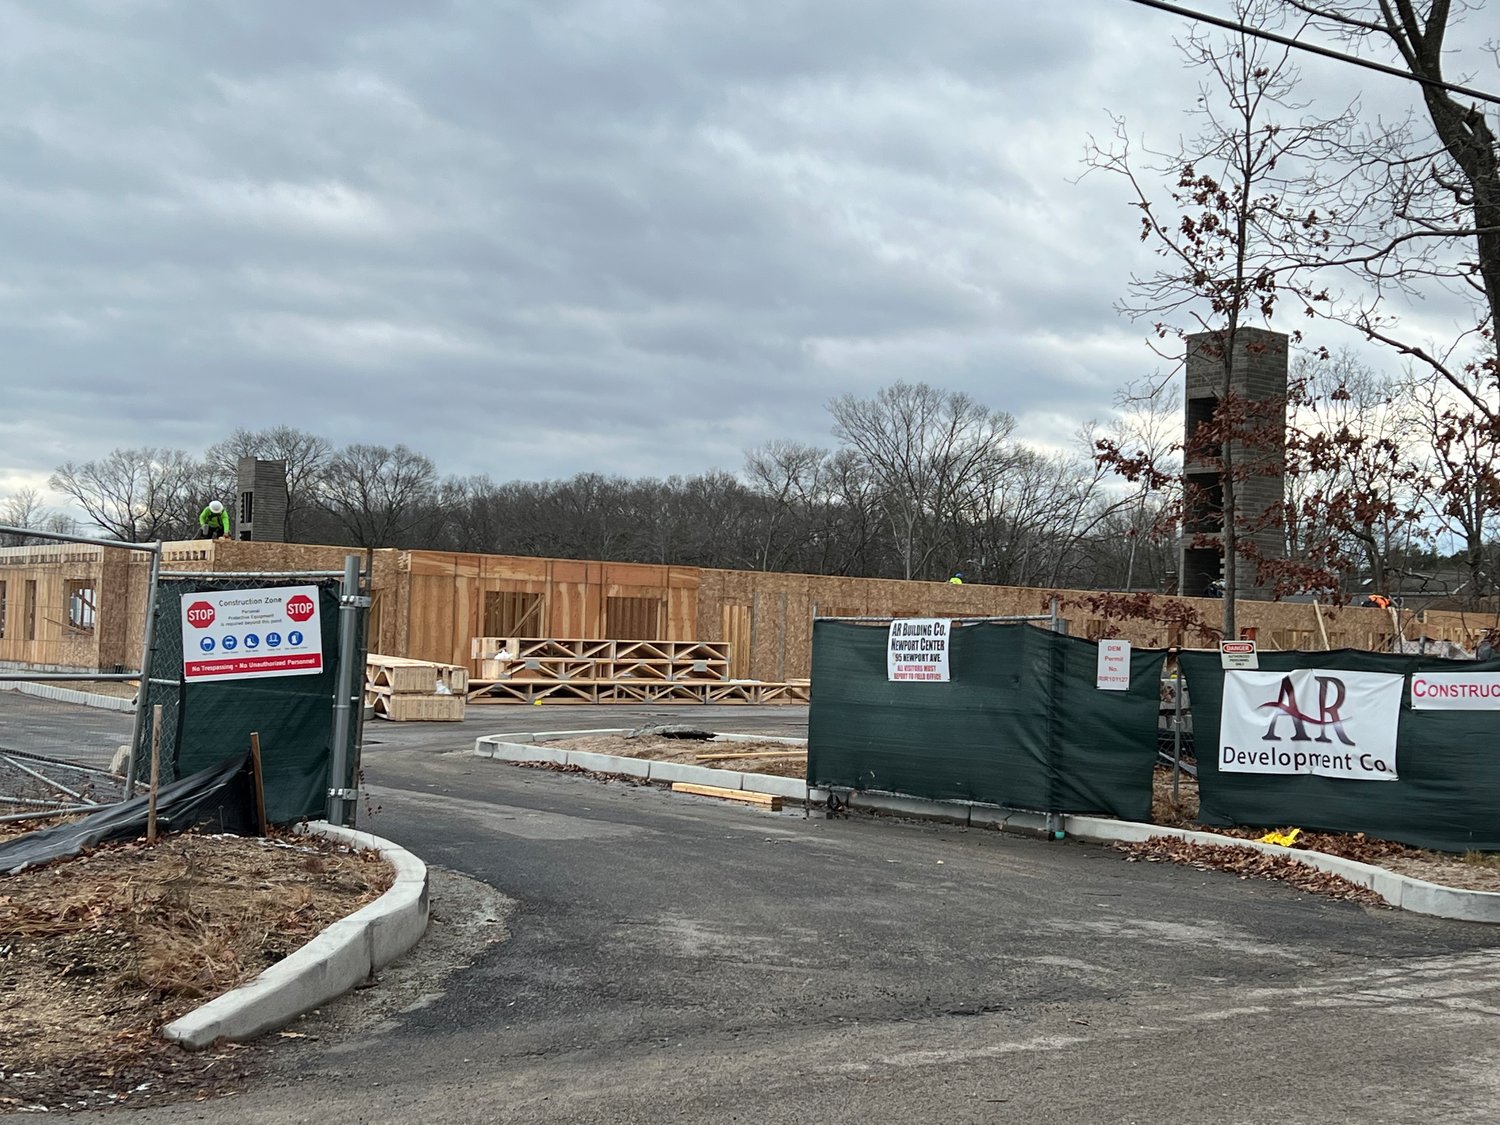 The first of two apartment buildings is being constructed at "Newport Center" in Rumford off Newport Avenue.